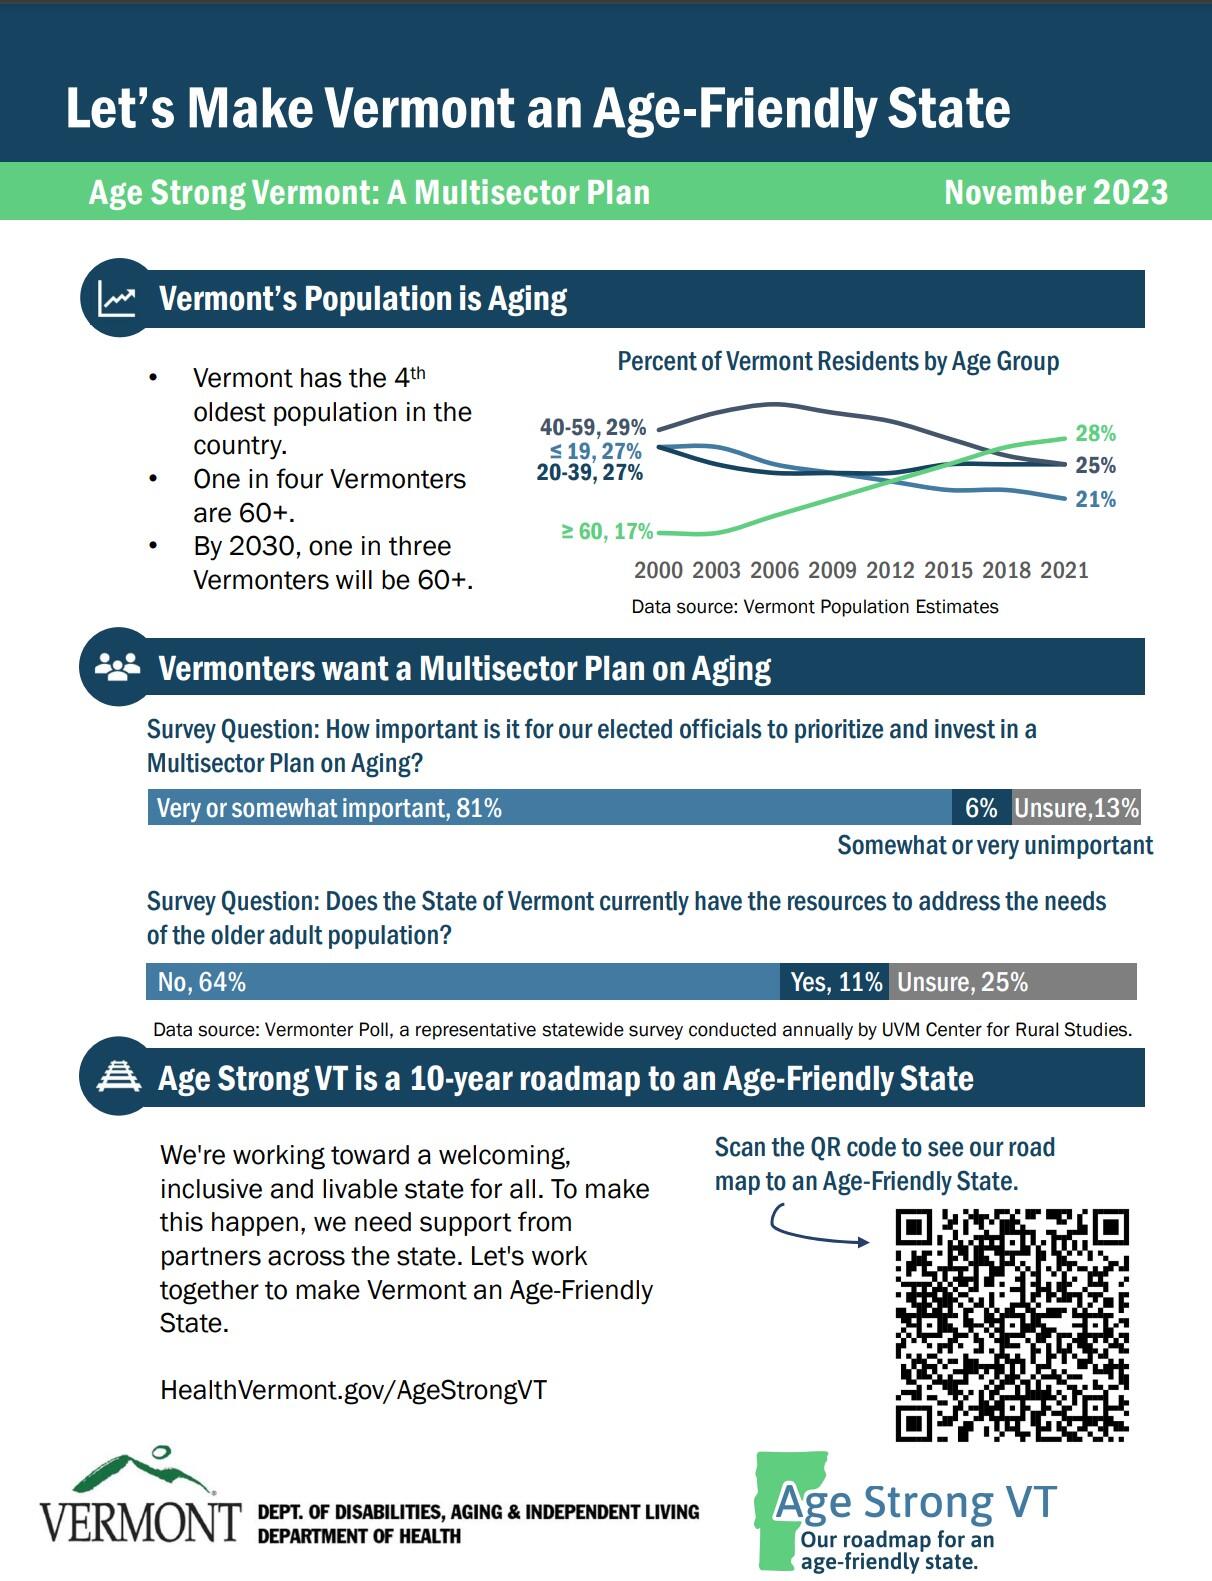 Image of an infographic that provides information on aging in Vermont.